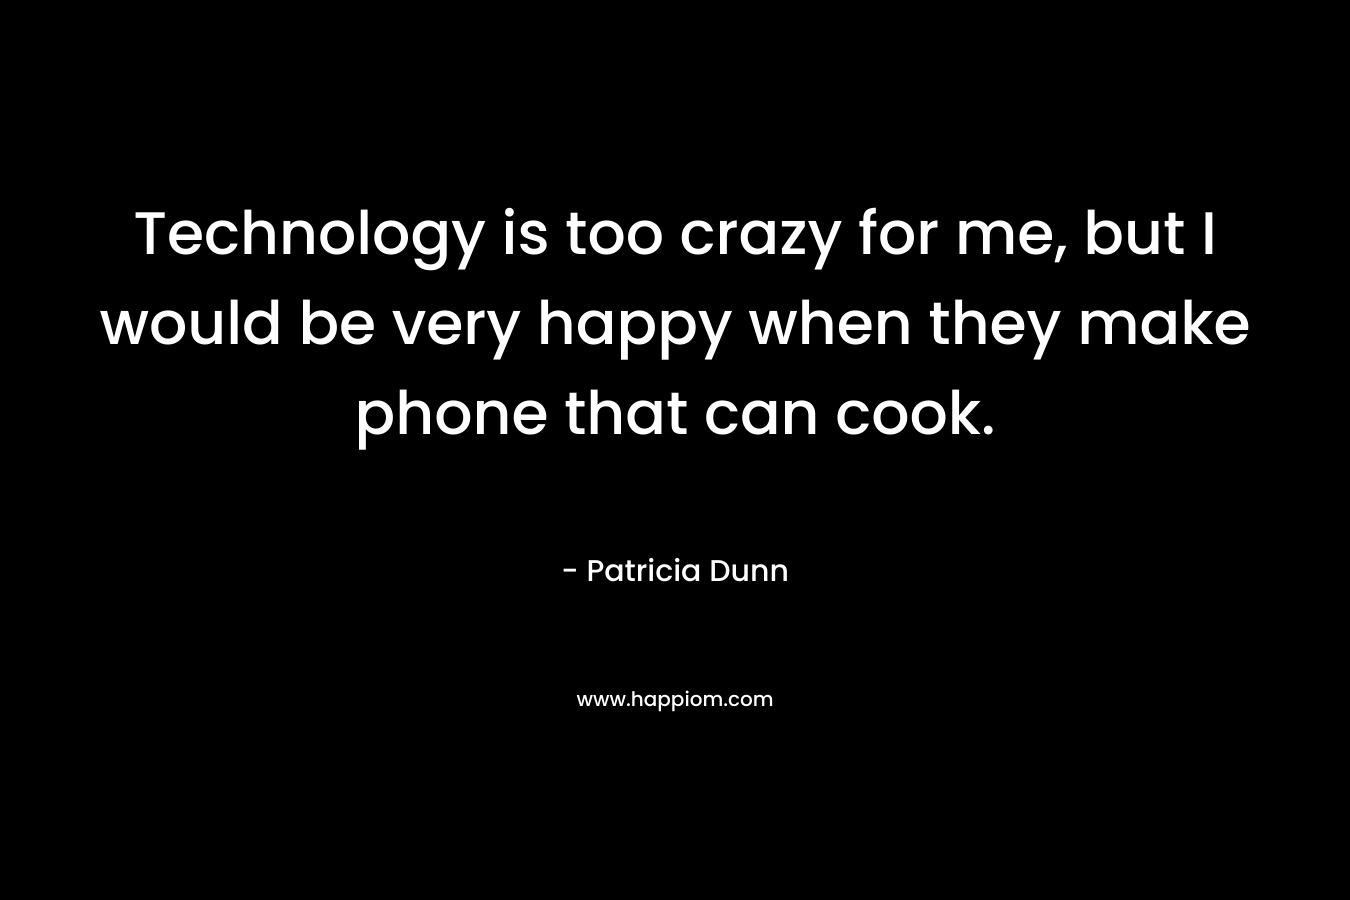 Technology is too crazy for me, but I would be very happy when they make phone that can cook. – Patricia Dunn